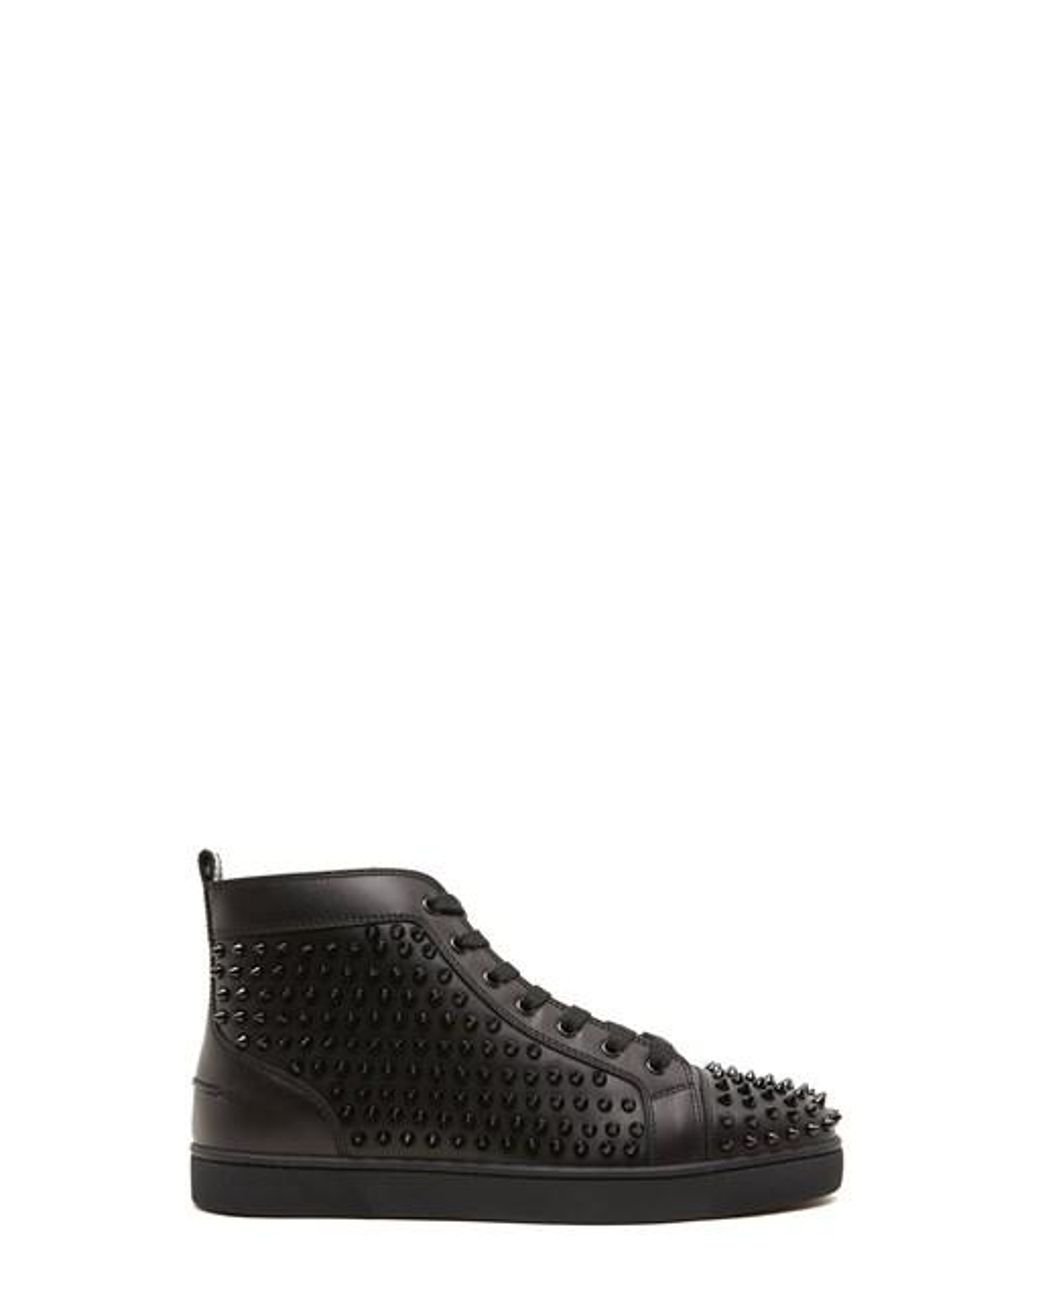 Louis - Veau velours and spikes - Black - Christian Louboutin